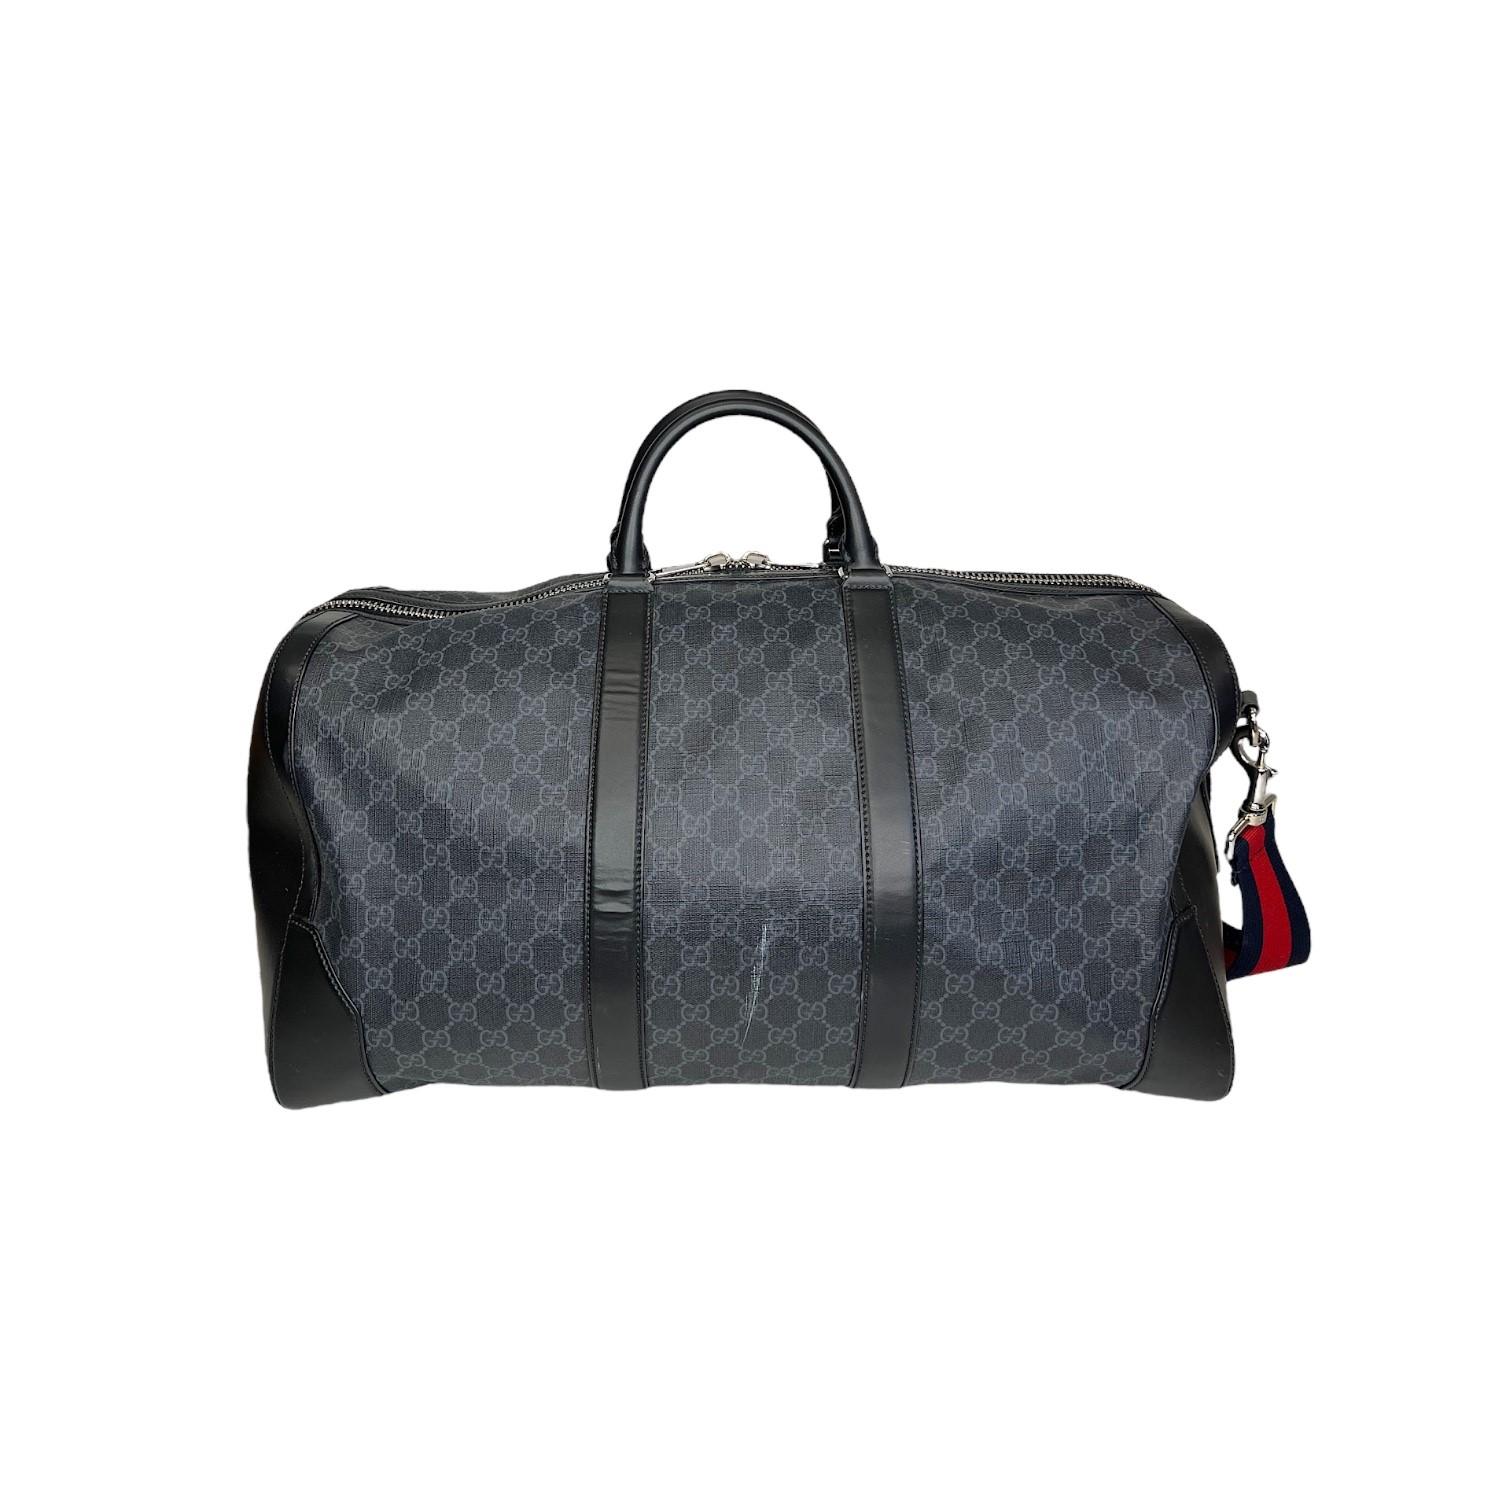 This Gucci GG Supreme Carry-On Duffle Bag was made in Italy and it is finely crafted of the Gucci GG Supreme canvas exterior with black leather trimming and silver-tone hardware features. It comes with a removeable and adjustable red and blue